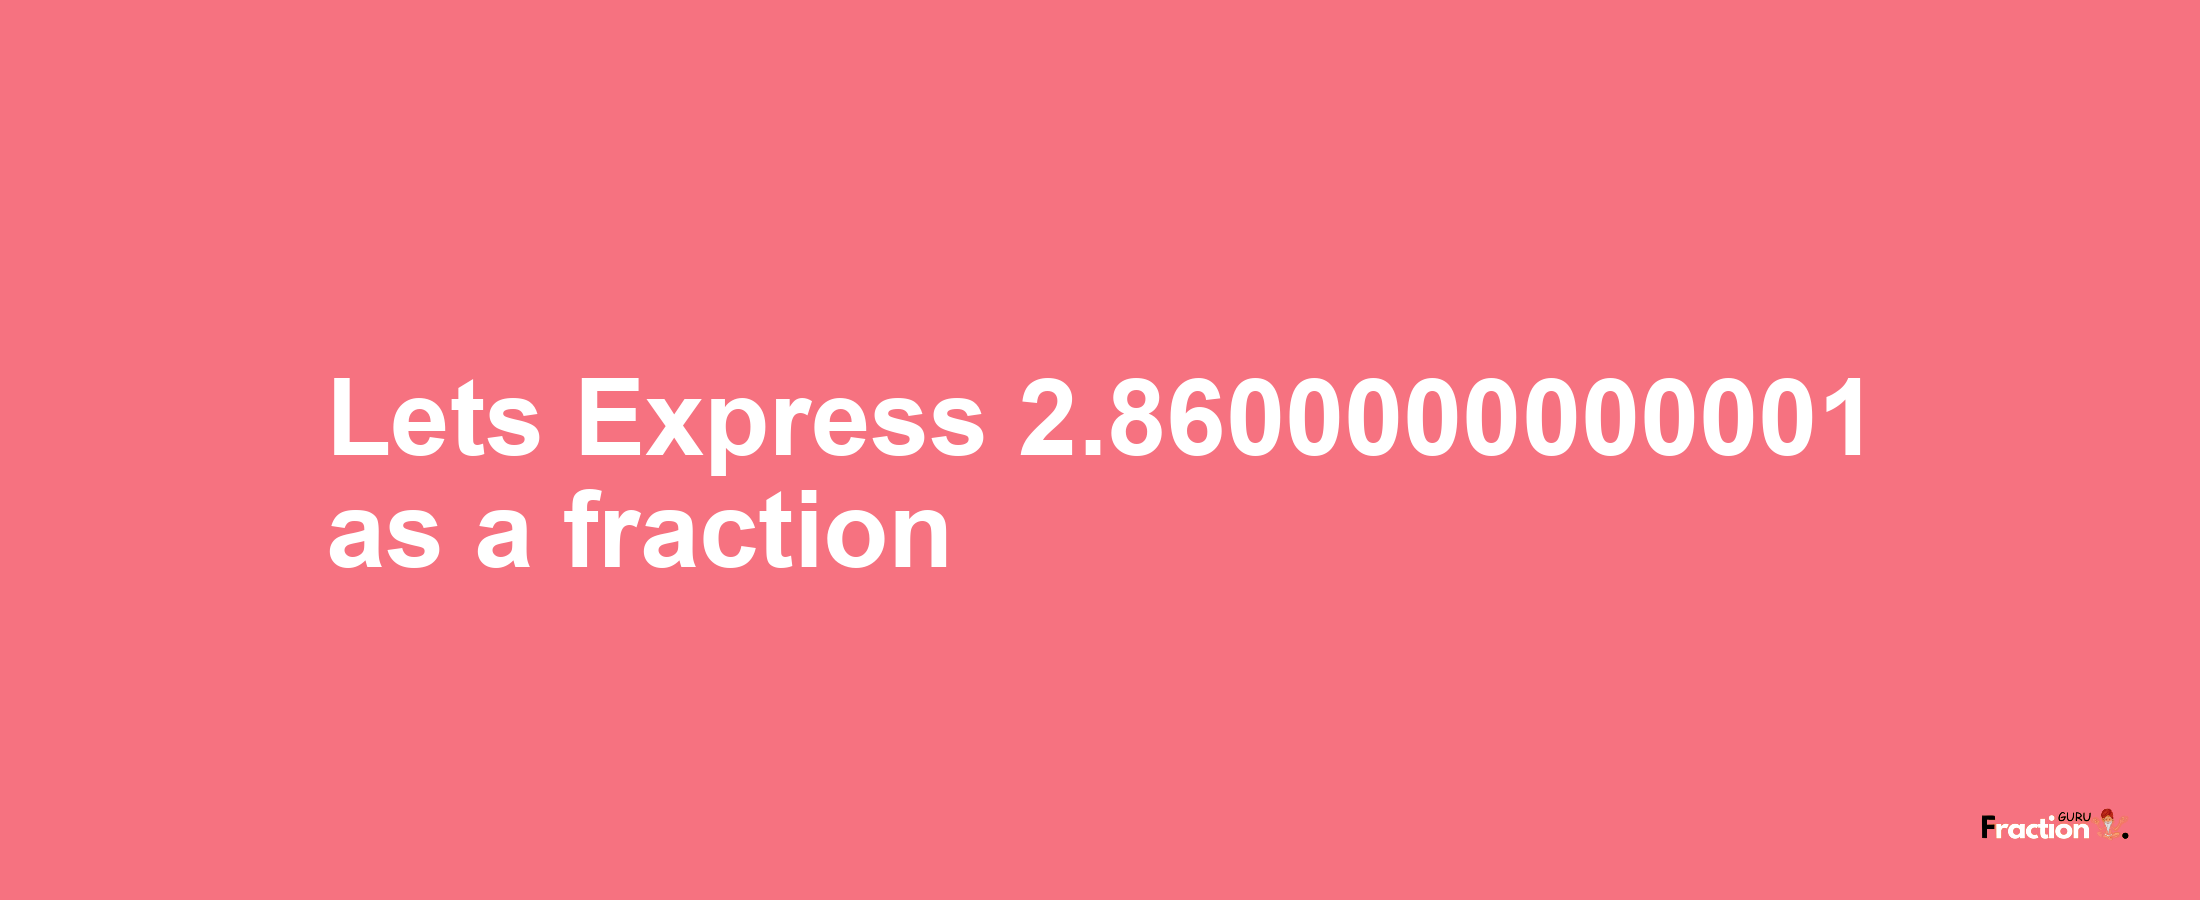 Lets Express 2.8600000000001 as afraction